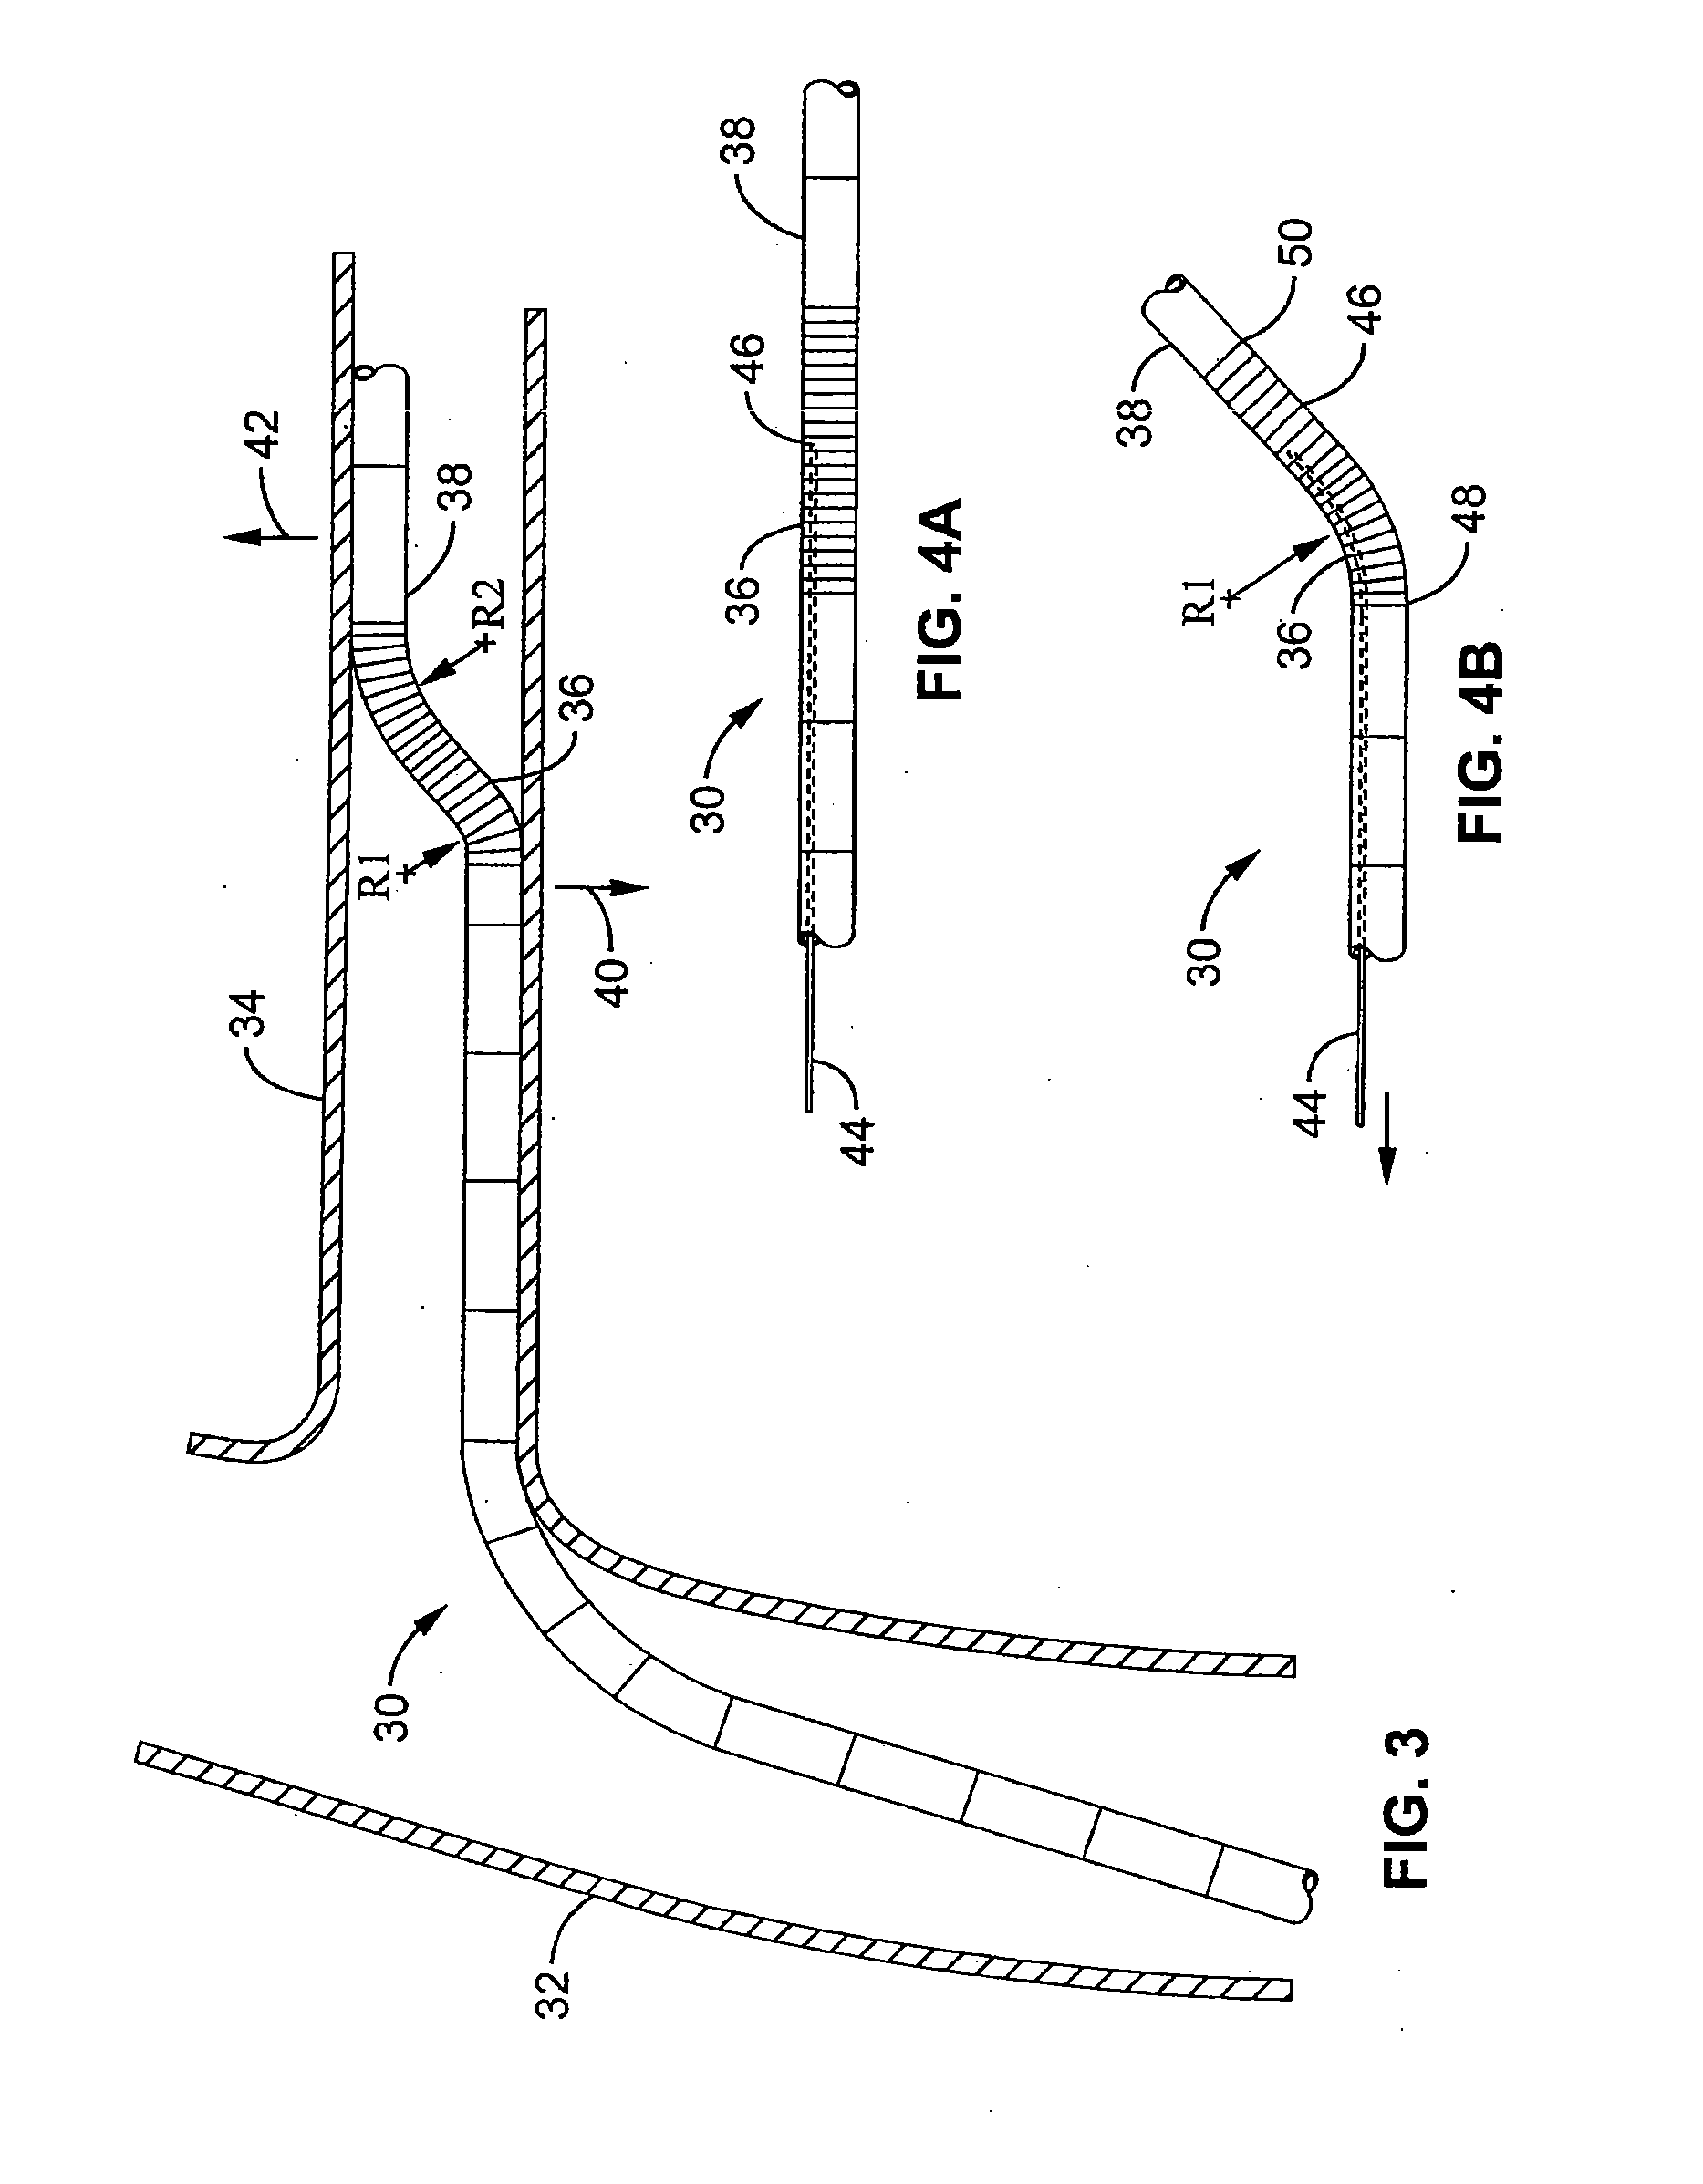 Method and apparatus for selective material delivery via an intra-renal catheter